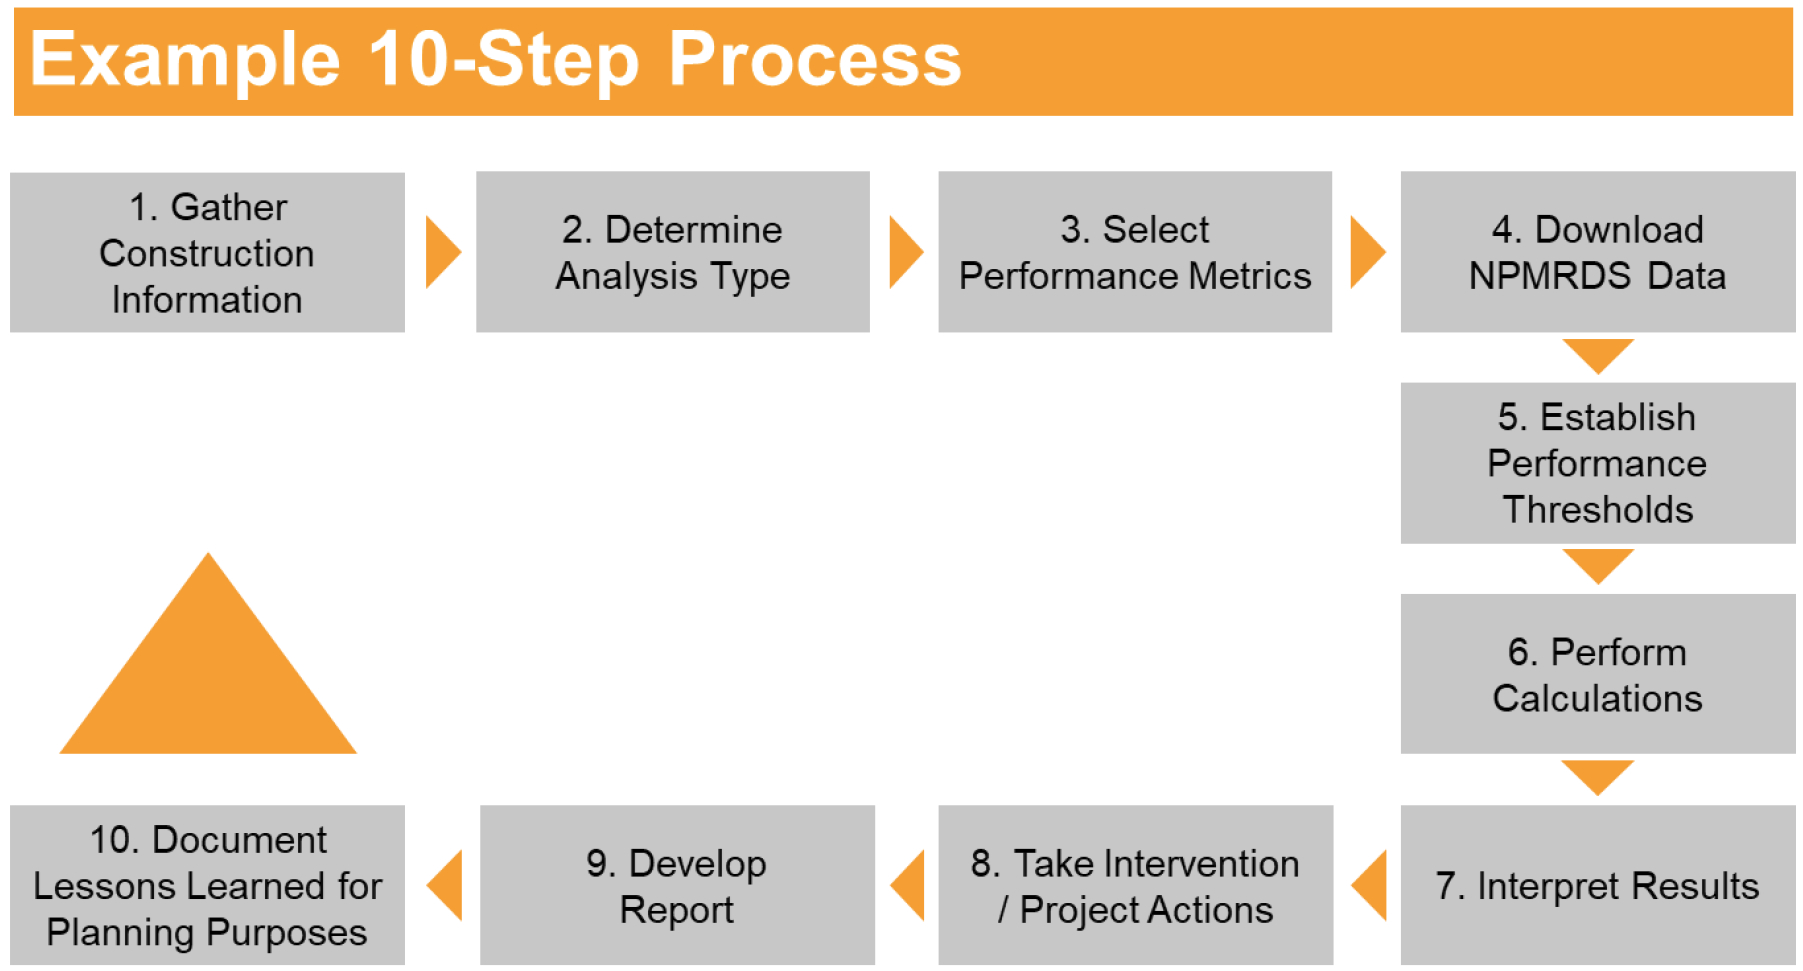 The 10 steps of the example process are listed:  1. Gather Construction Information, 2. Determine Analysis Type, 3. Select Performance Metrics, 4. Download NPMRDS Data, 5. Establish Performance Thresholds, 6. Perform Calculations, 7. Interpret Results, 8. Take Intervention / Project Actions, 9. Develop Report, 10. Document Lessons Learned for Planning Purposes